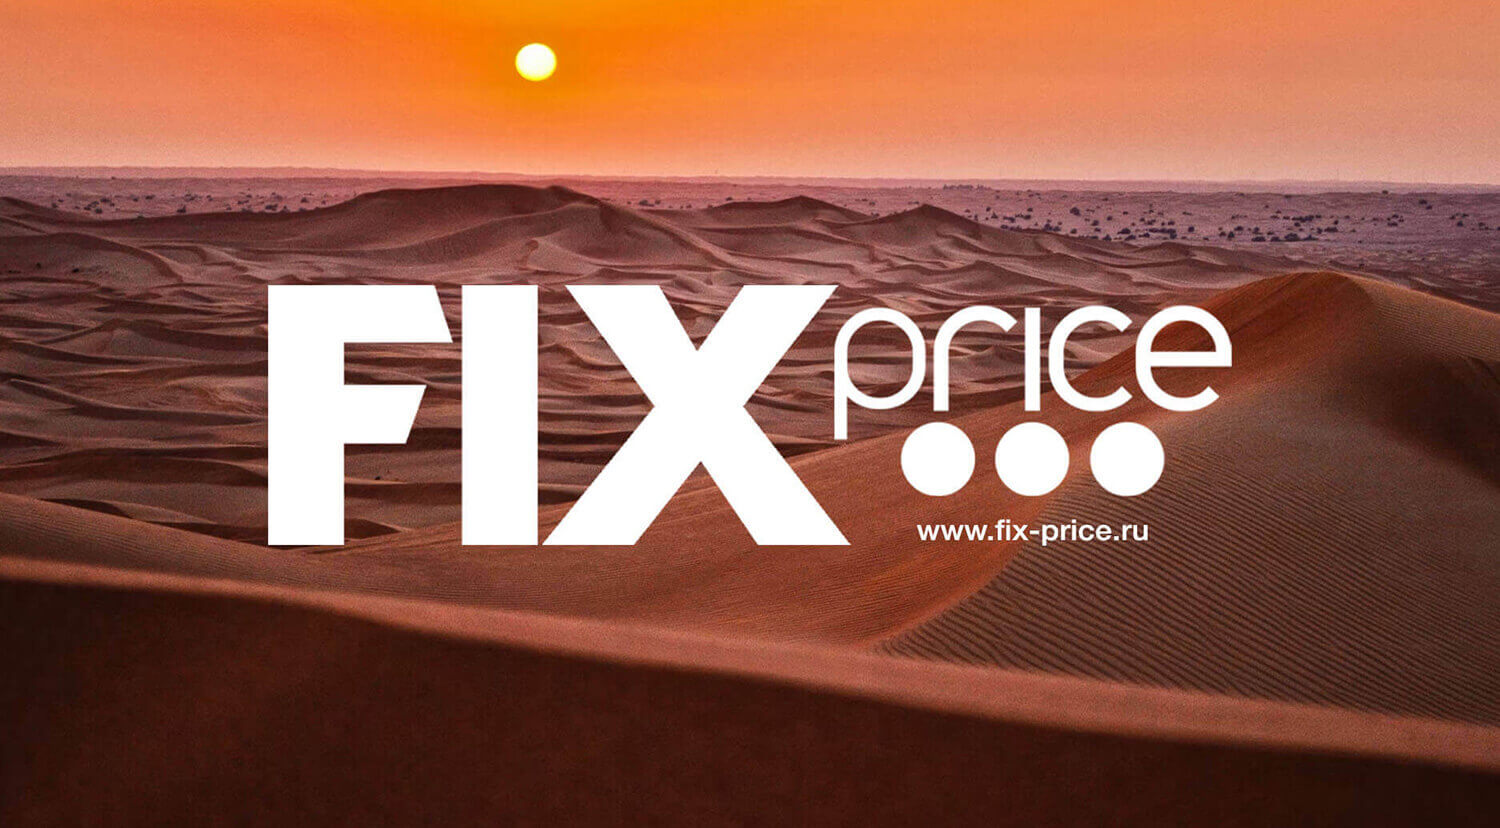 The Fix Price brand identity delivers impact, unleashing a bold brand personality in the retail landscape